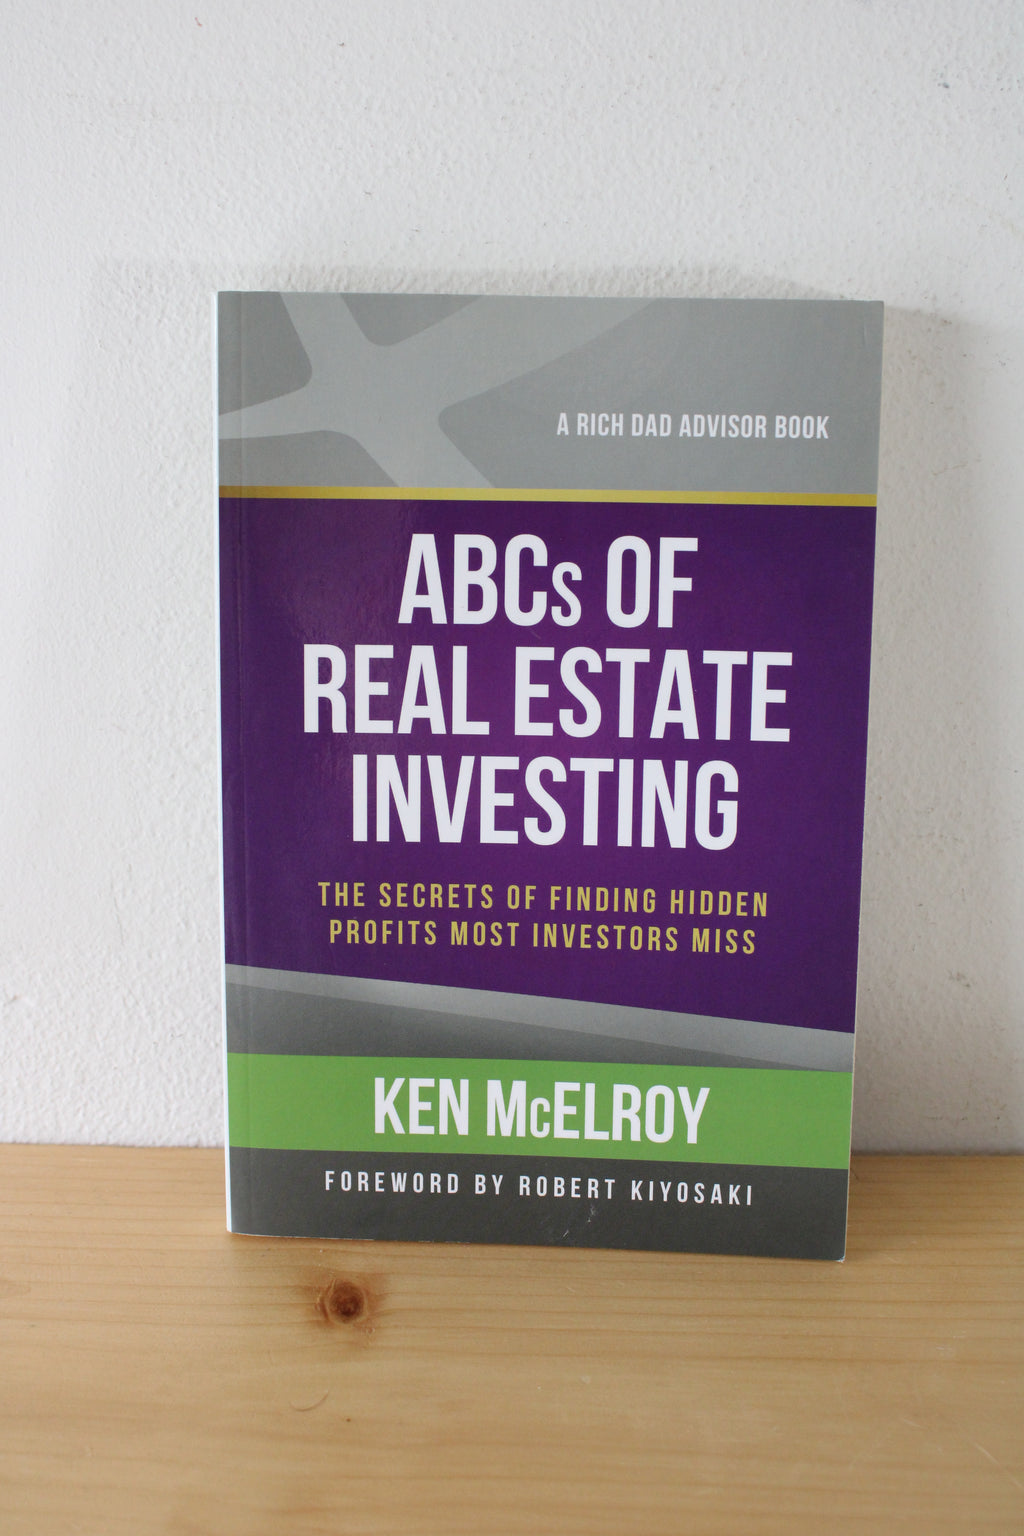 ABC's Of Real Estate Investing: The Secrets Of Finding Hidden Profits Most Investors Miss By Ken McElroy